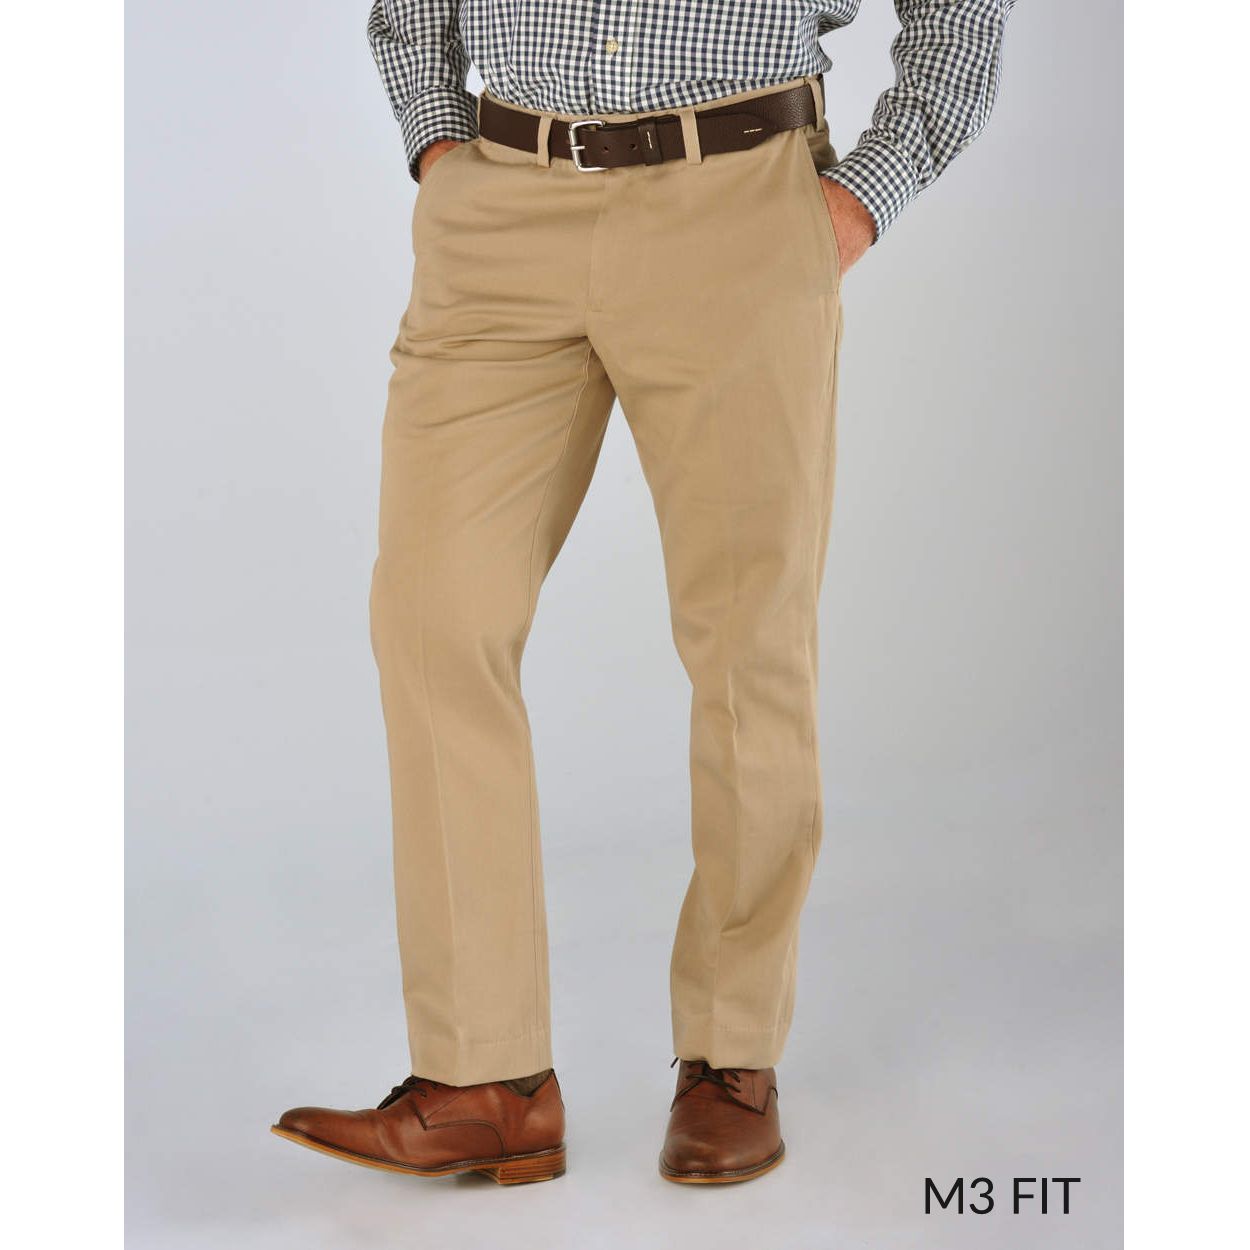 M3 Straight Fit Vintage Twills in Olive by Bills Khakis